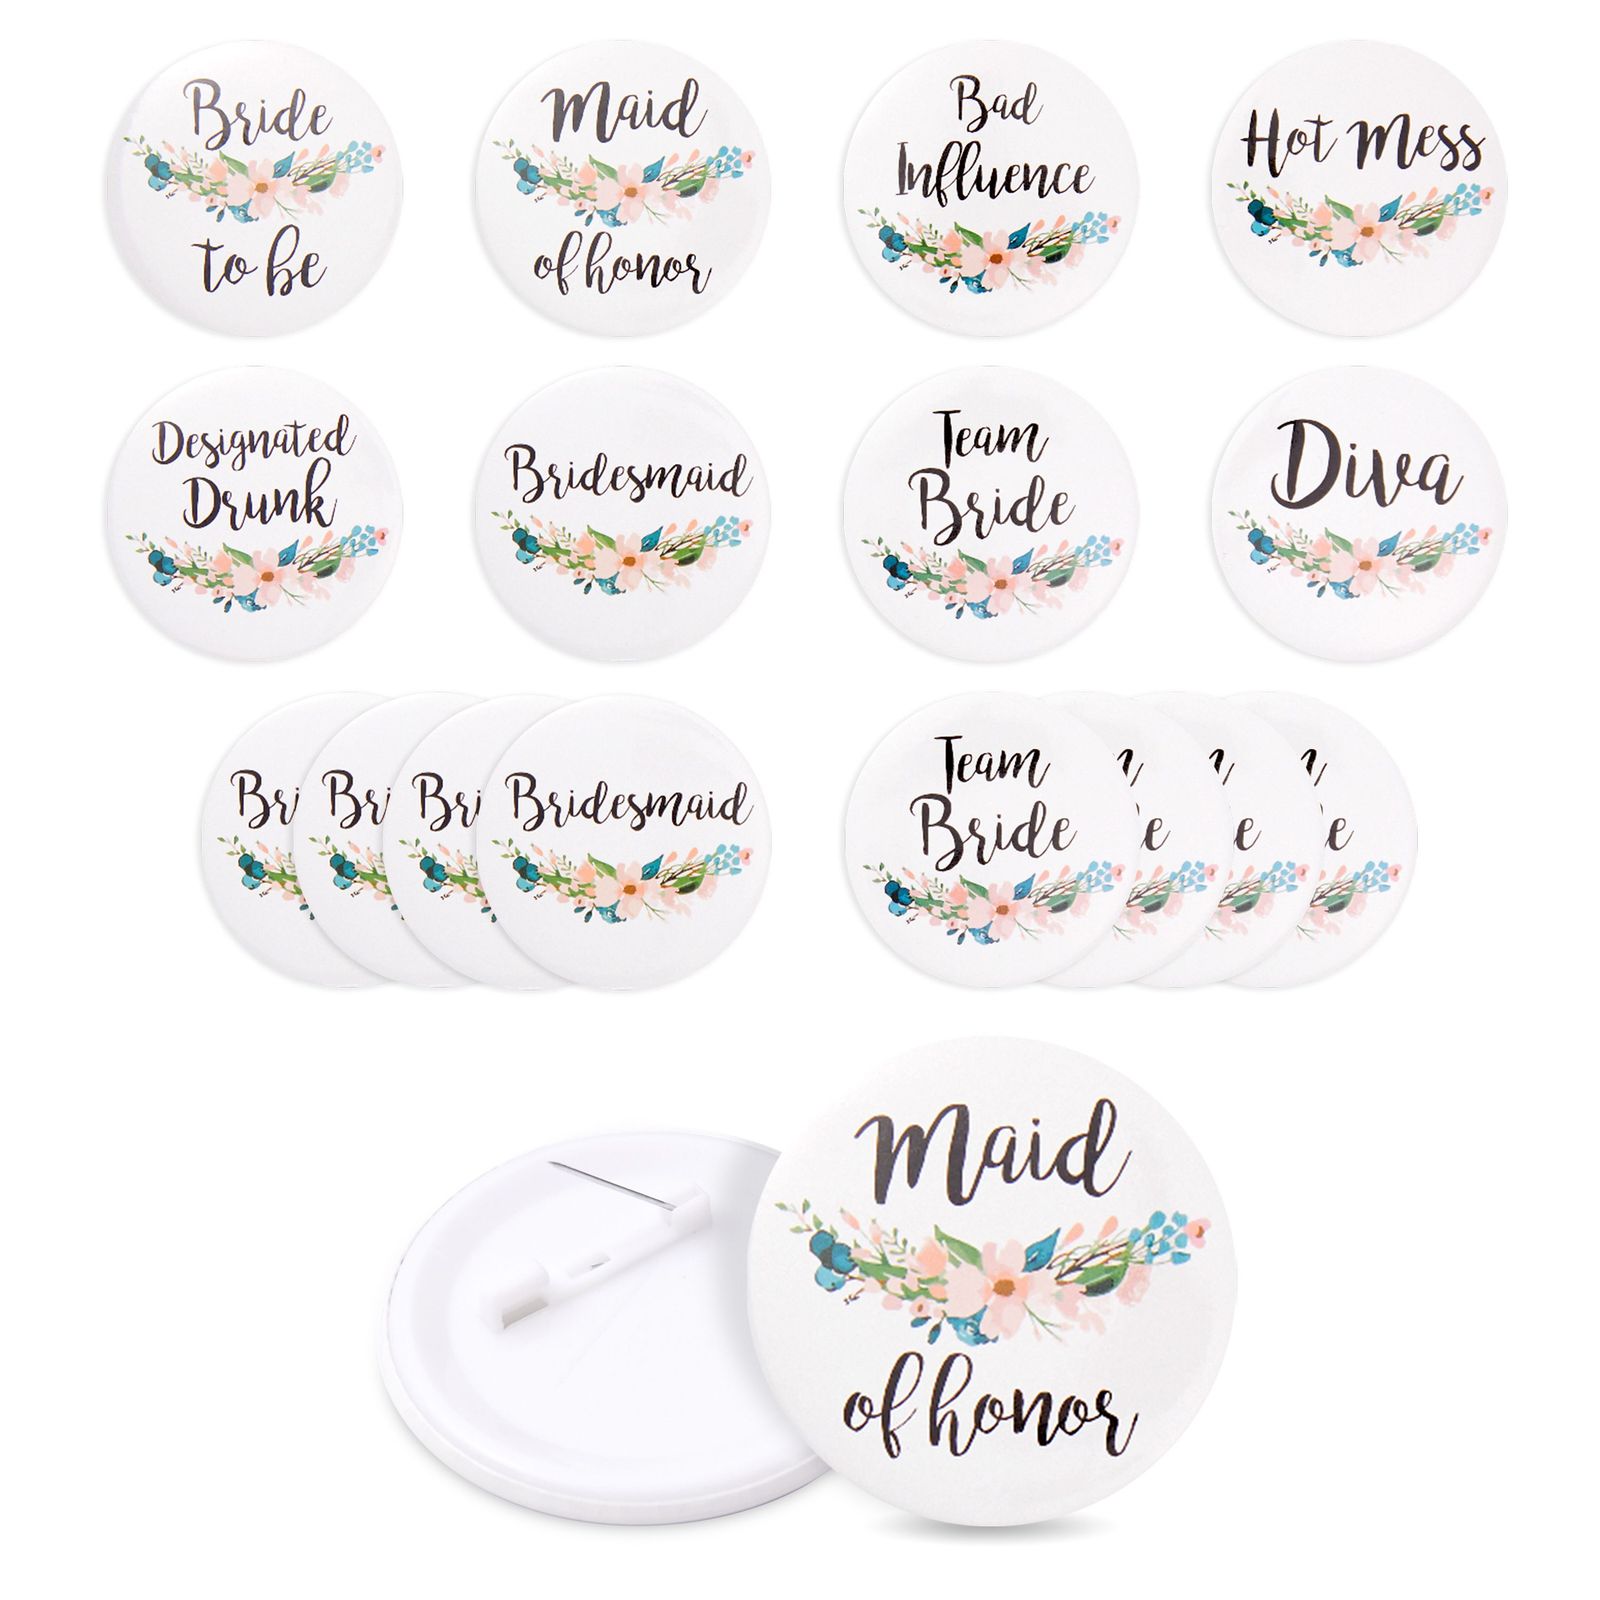 16 Pack - Bridal Party Pins - Wedding Party Buttons - Bridesmaid Gifts,  Favors & Gifts, Team Bride, Maid of Honor Party Supplies, White, 8 Unique  Designs 